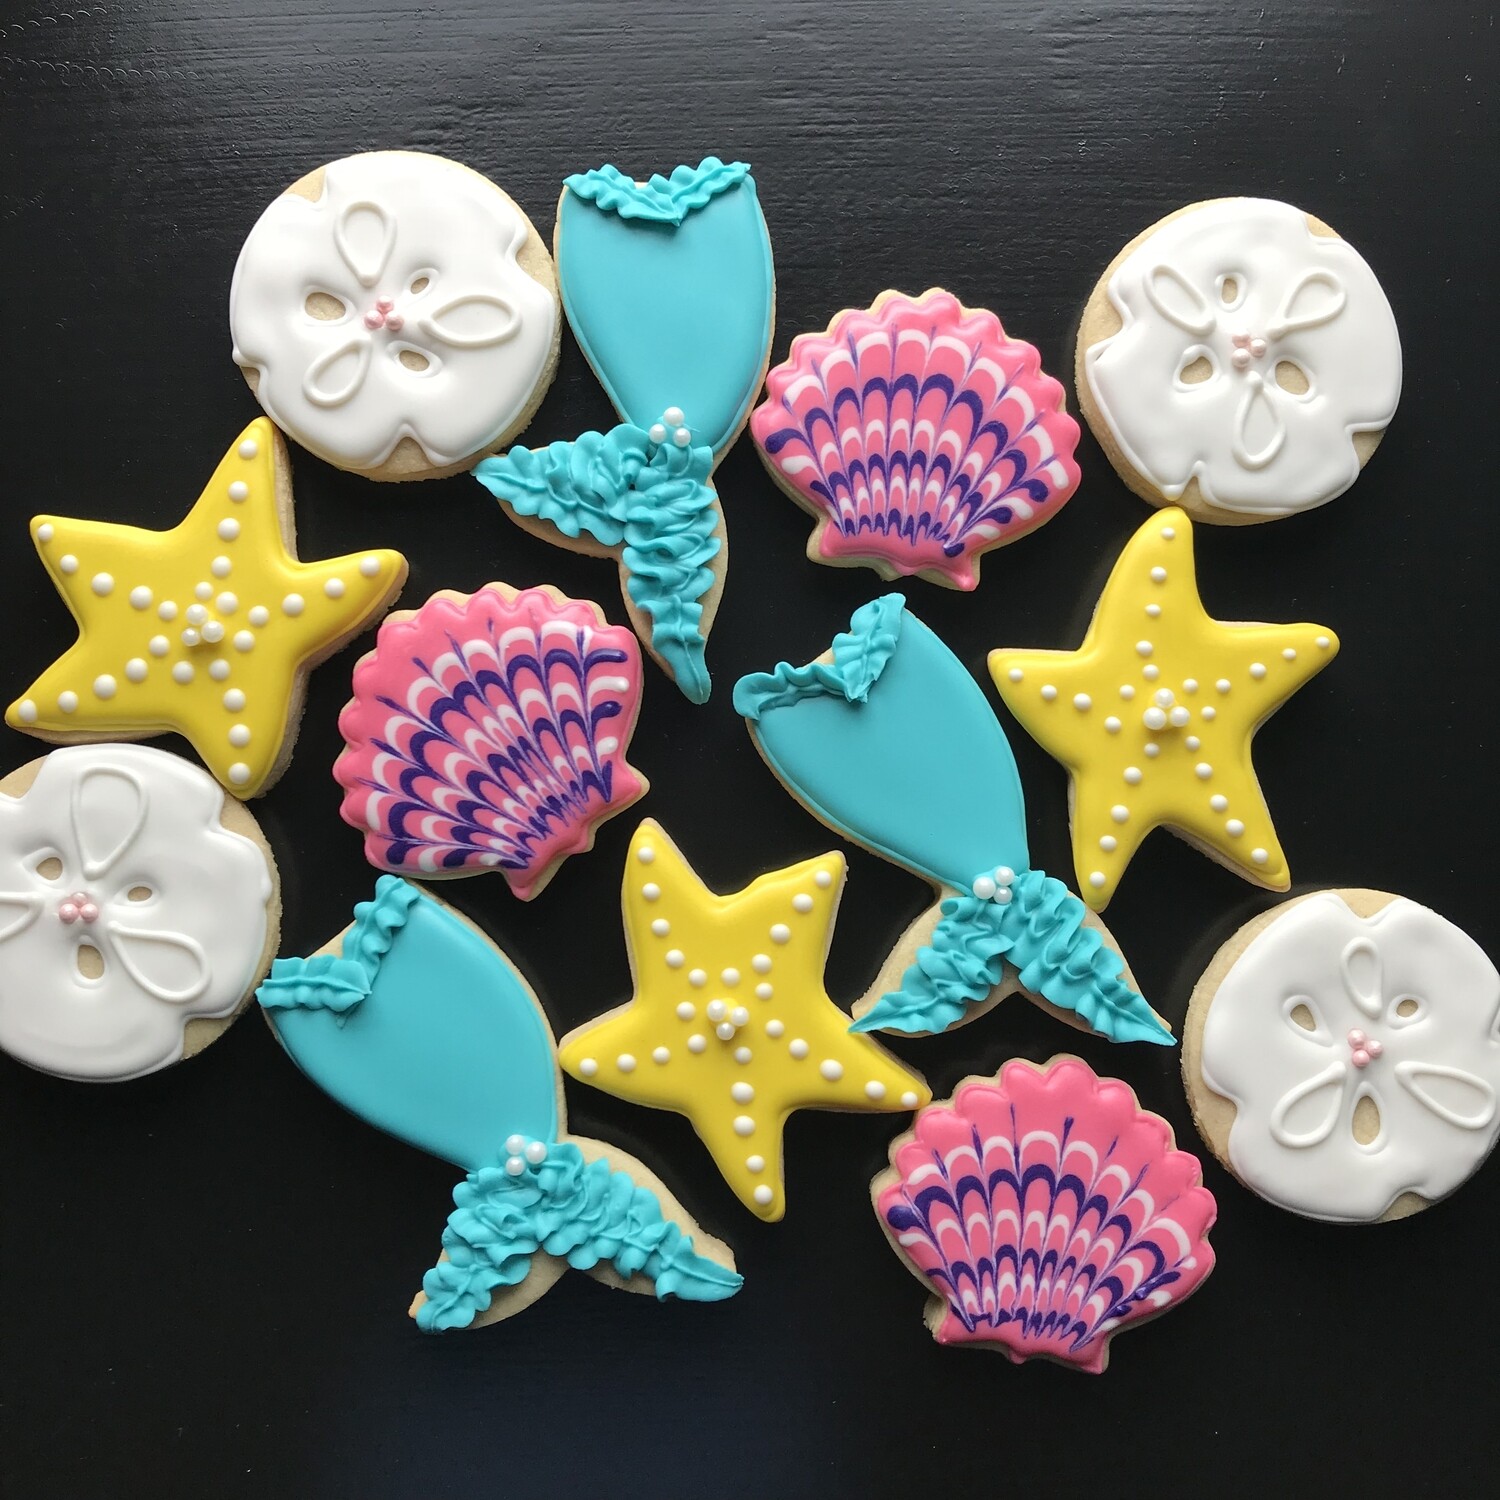 'Mermaid Decorating Workshop - THURSDAY, JULY 2nd at 6:30 p.m. (THE COOKIE DECORATING STUDIO)